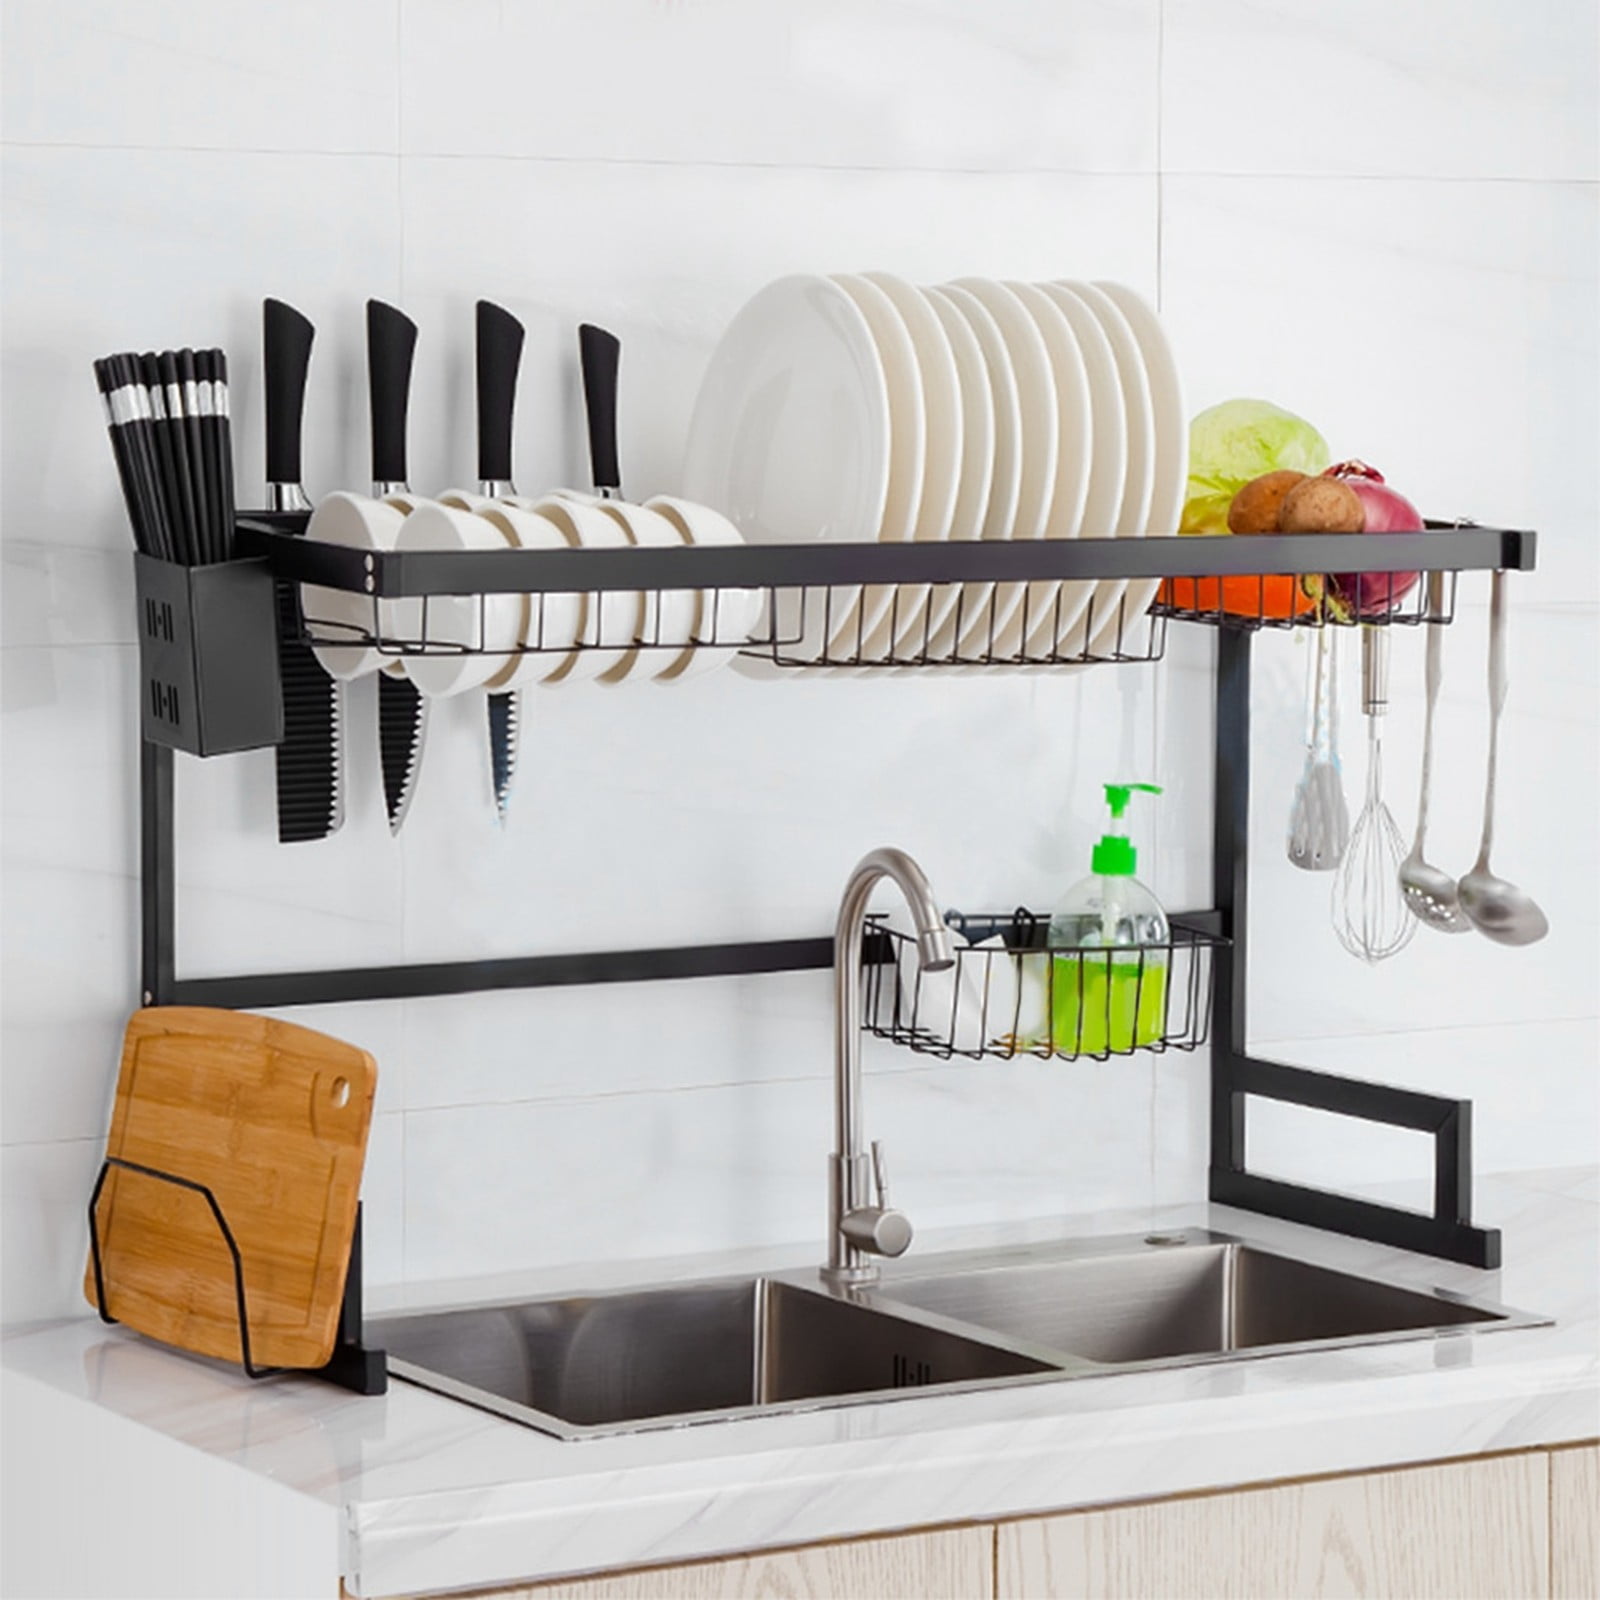 Details about   Kithchen Dish Drying Rack Over The Sink Adjustable Large Dish Rack Drainer 